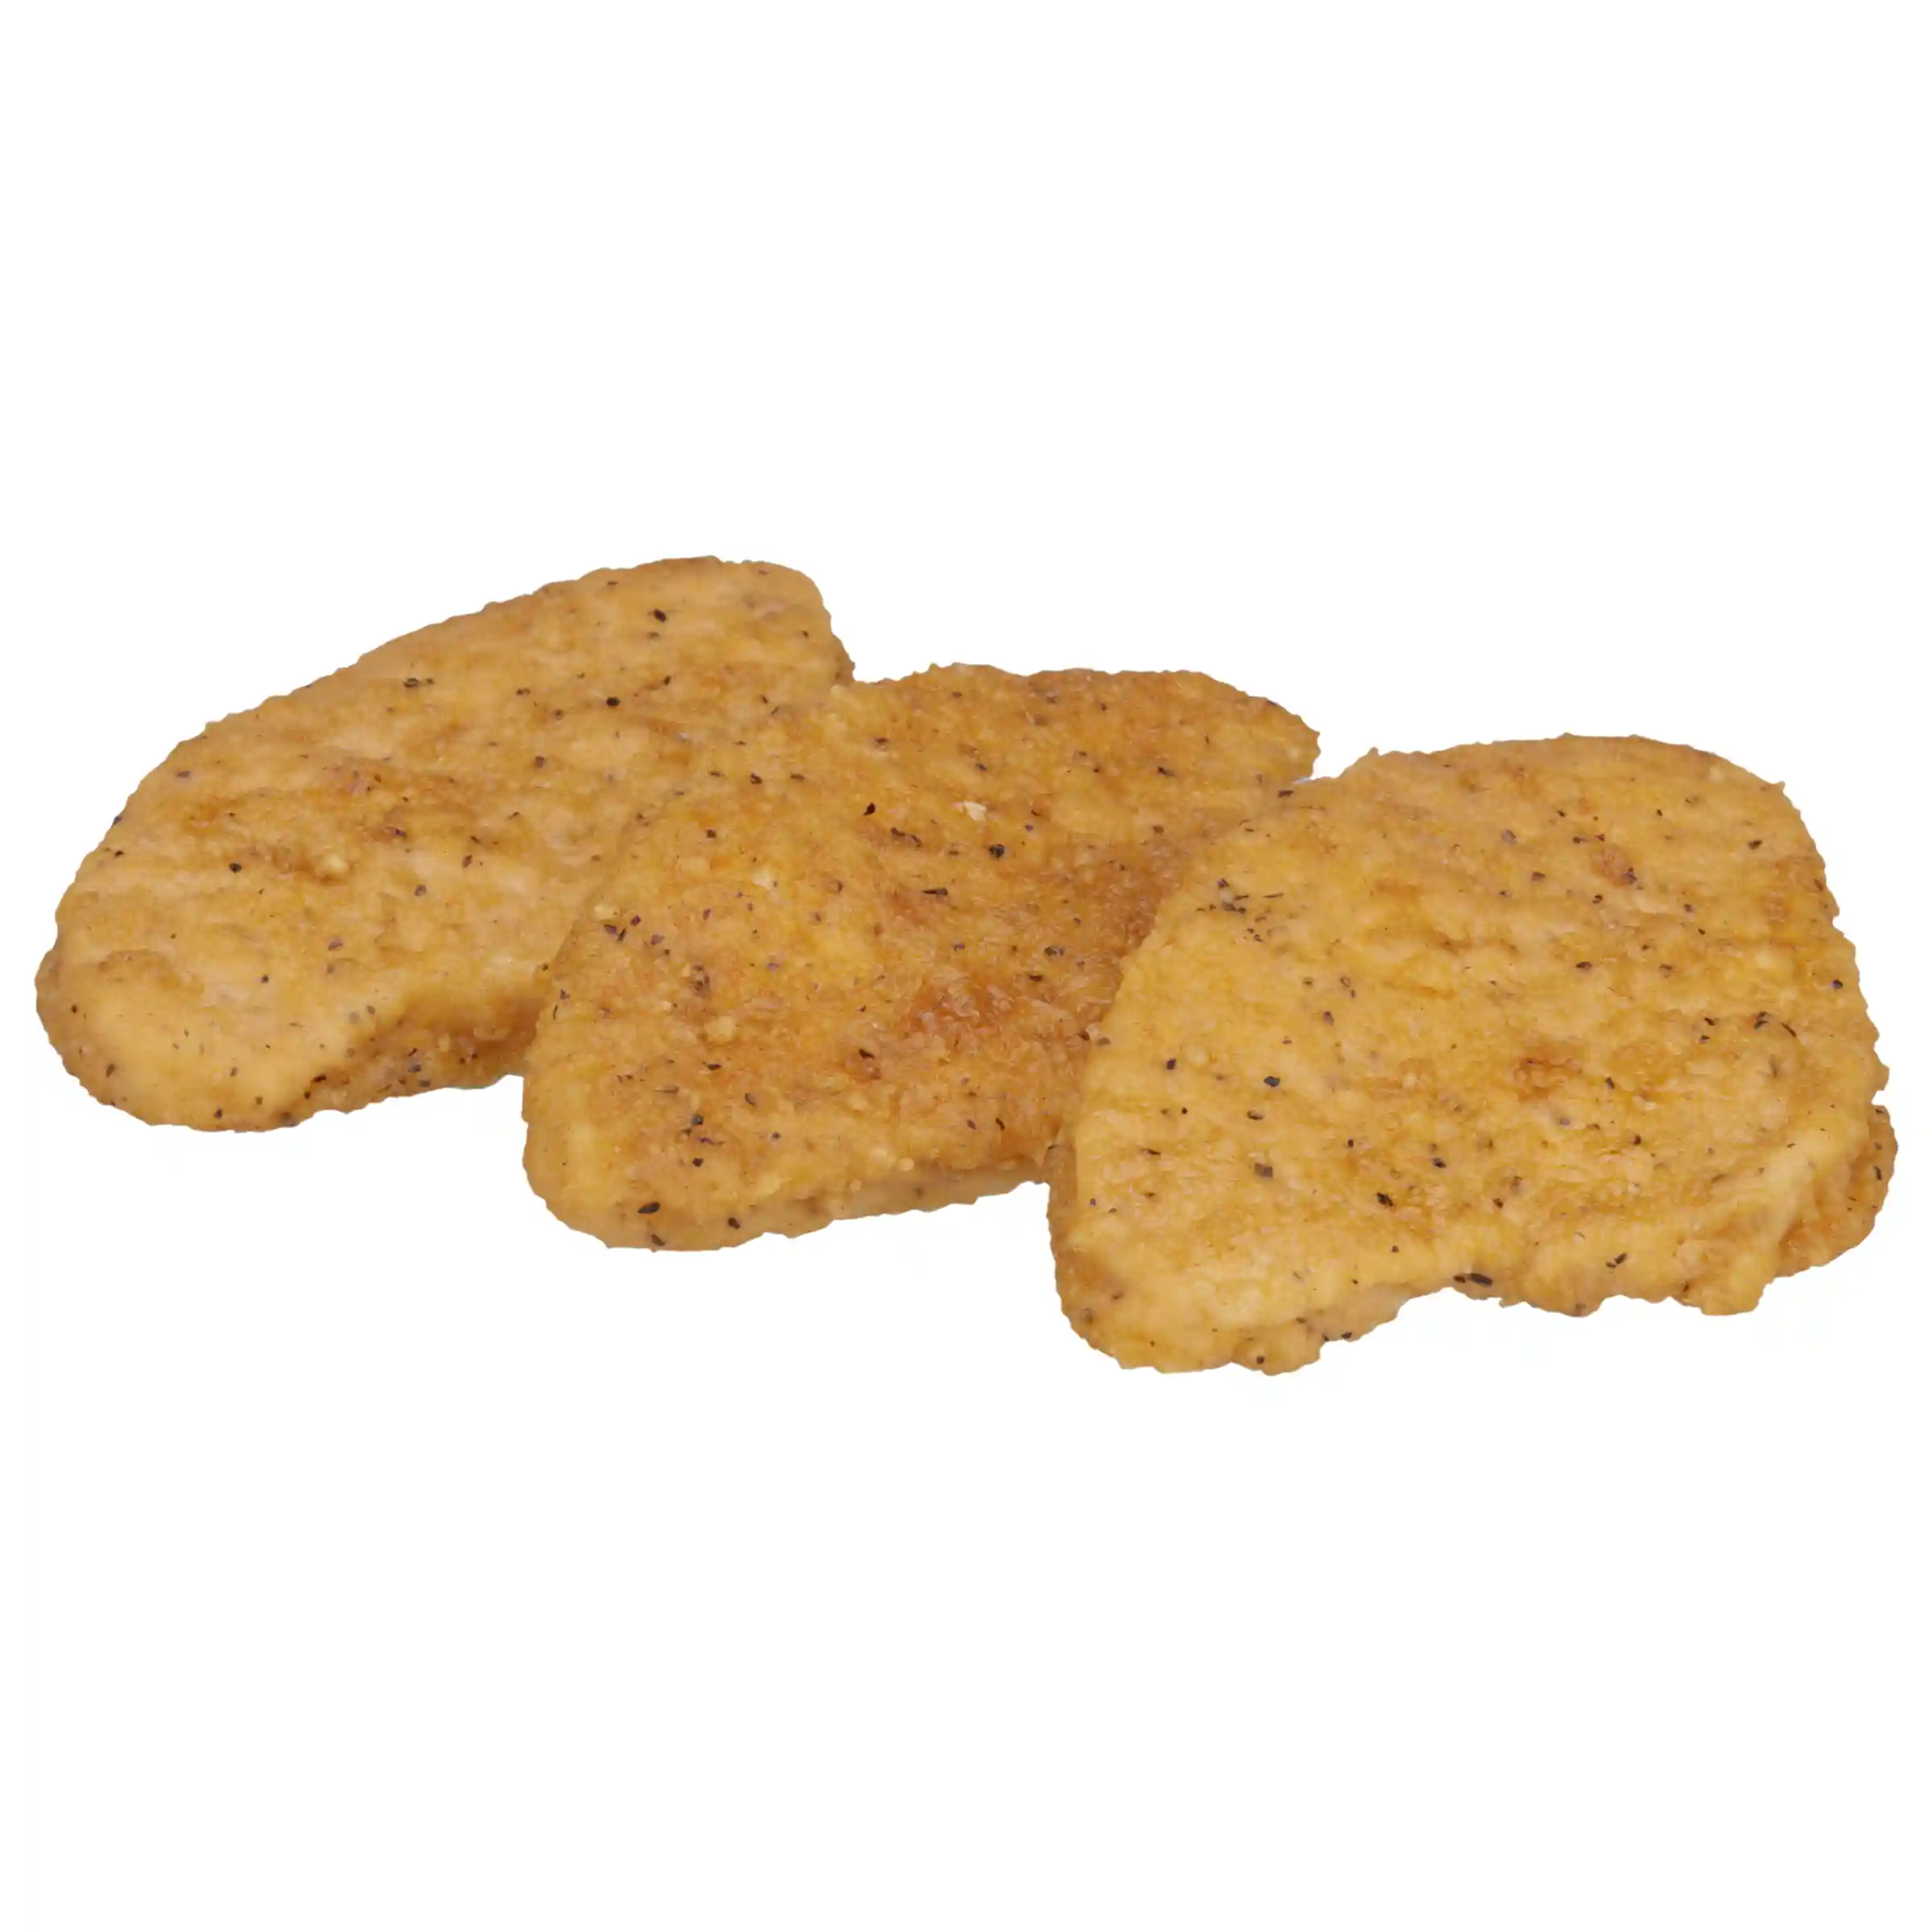 Tyson Red Label® Uncooked Hot & Spicy Chicken Breast Pattie Fritters, 3.2 oz. _image_11